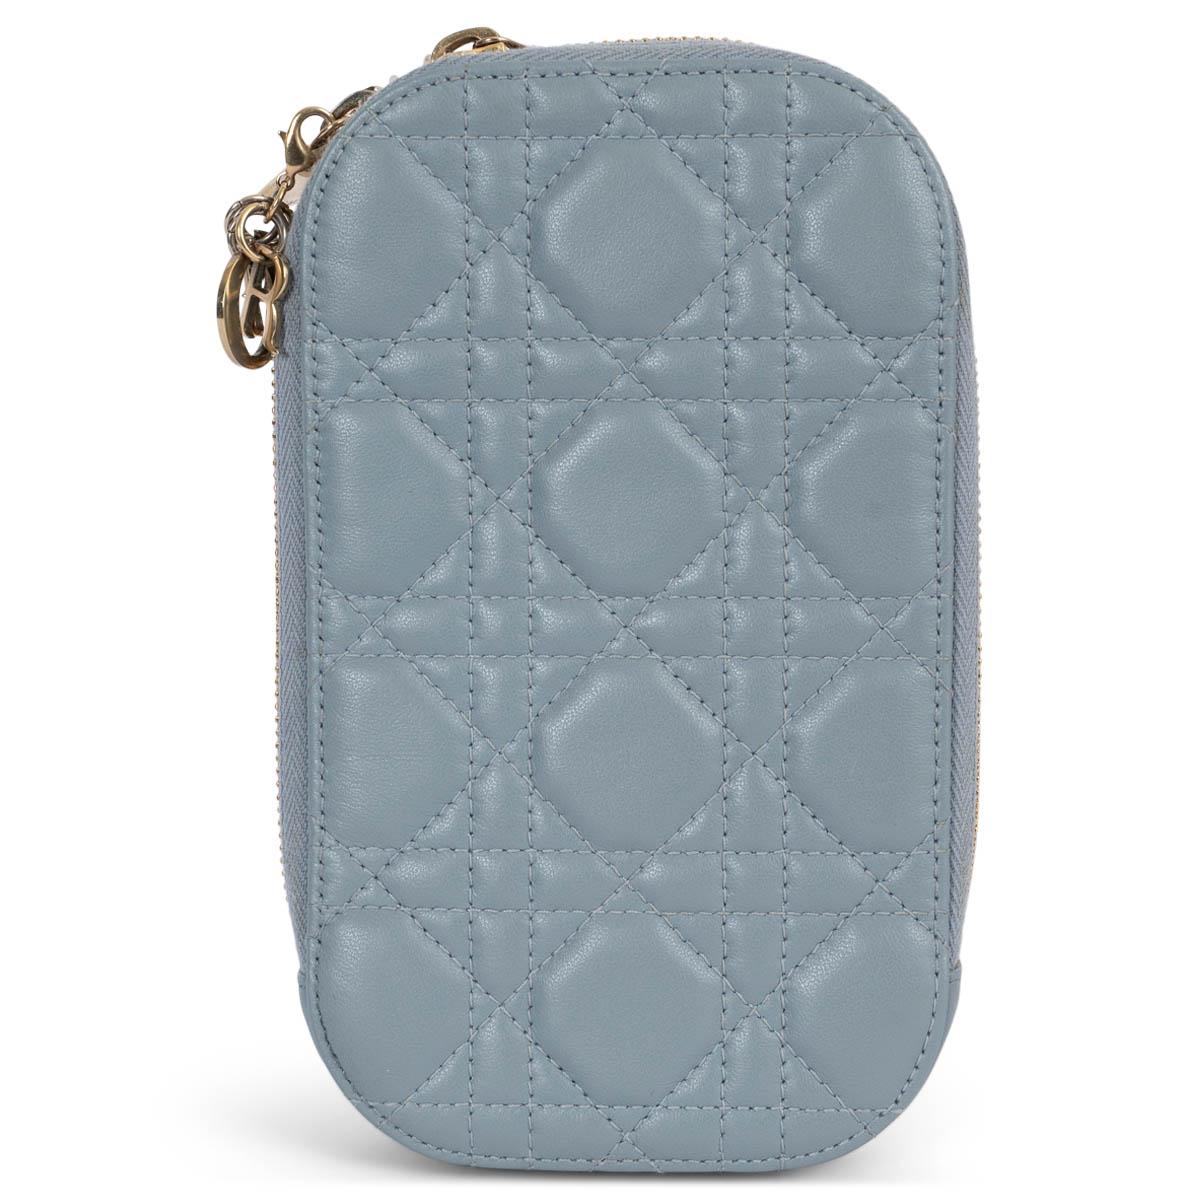 100% authentic Christian Dior Lady Dior Call'in Dior phone holder in cloud blue Carnage lambskin leather featuring light gold-tone hardware. Opens with a double zipper and is lined in blue nylon with three credit card slots. The design comes with a